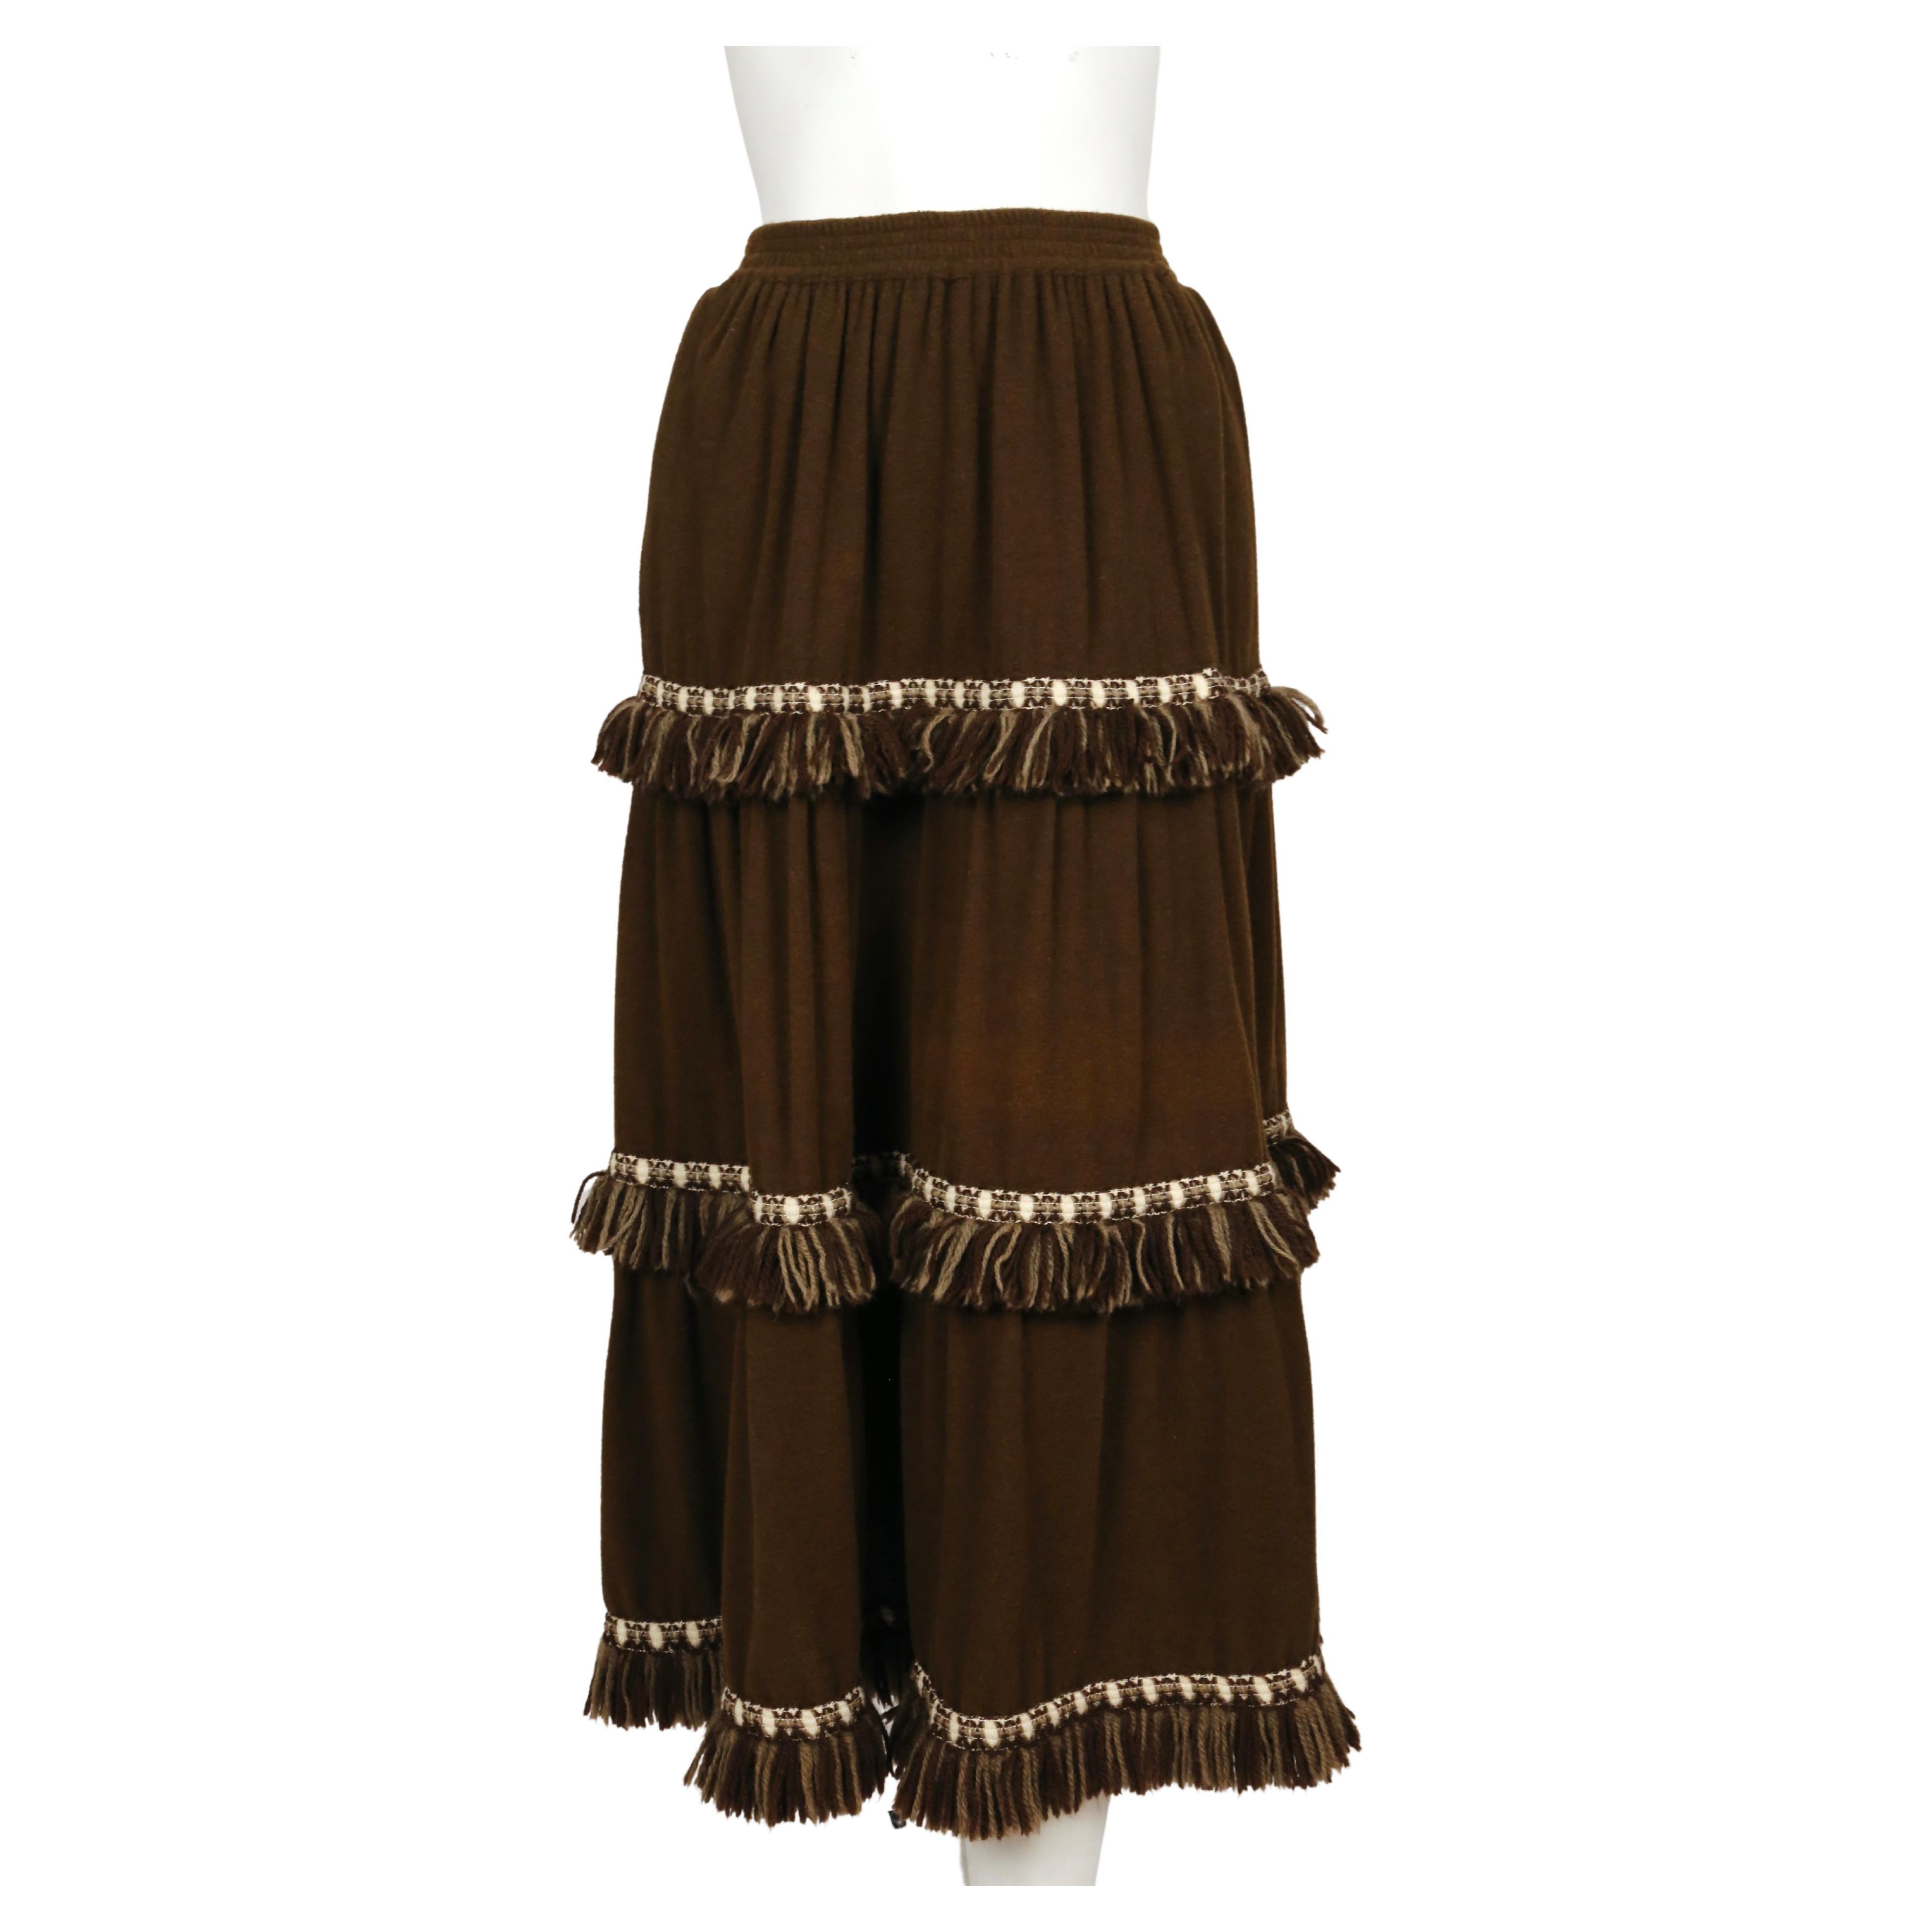 Very soft, rich dark brown wool skirt with cream fringed yarn trim designed by Yves Saint Laurent dating to the 1970's. Labeled a FR 38. Approximate measurements (unstretched): waist 23.75